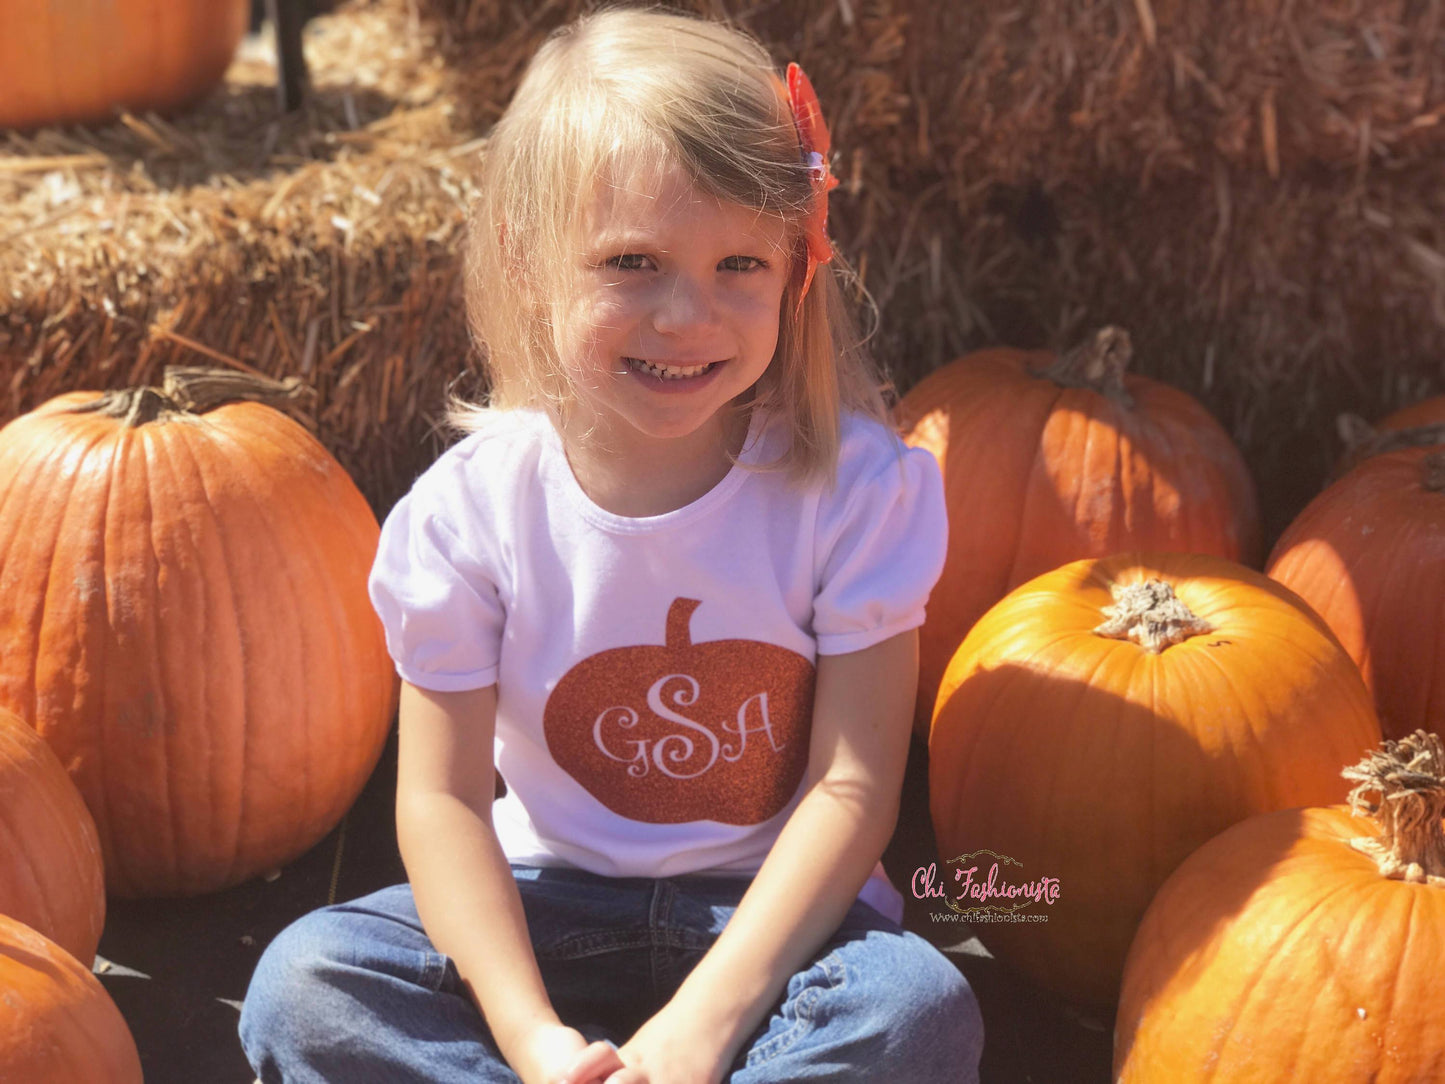 Handcrafted Children's Clothing, Clothing for Children and Parents, Monogrammed Pumpkin Shirt, chi-fashionista